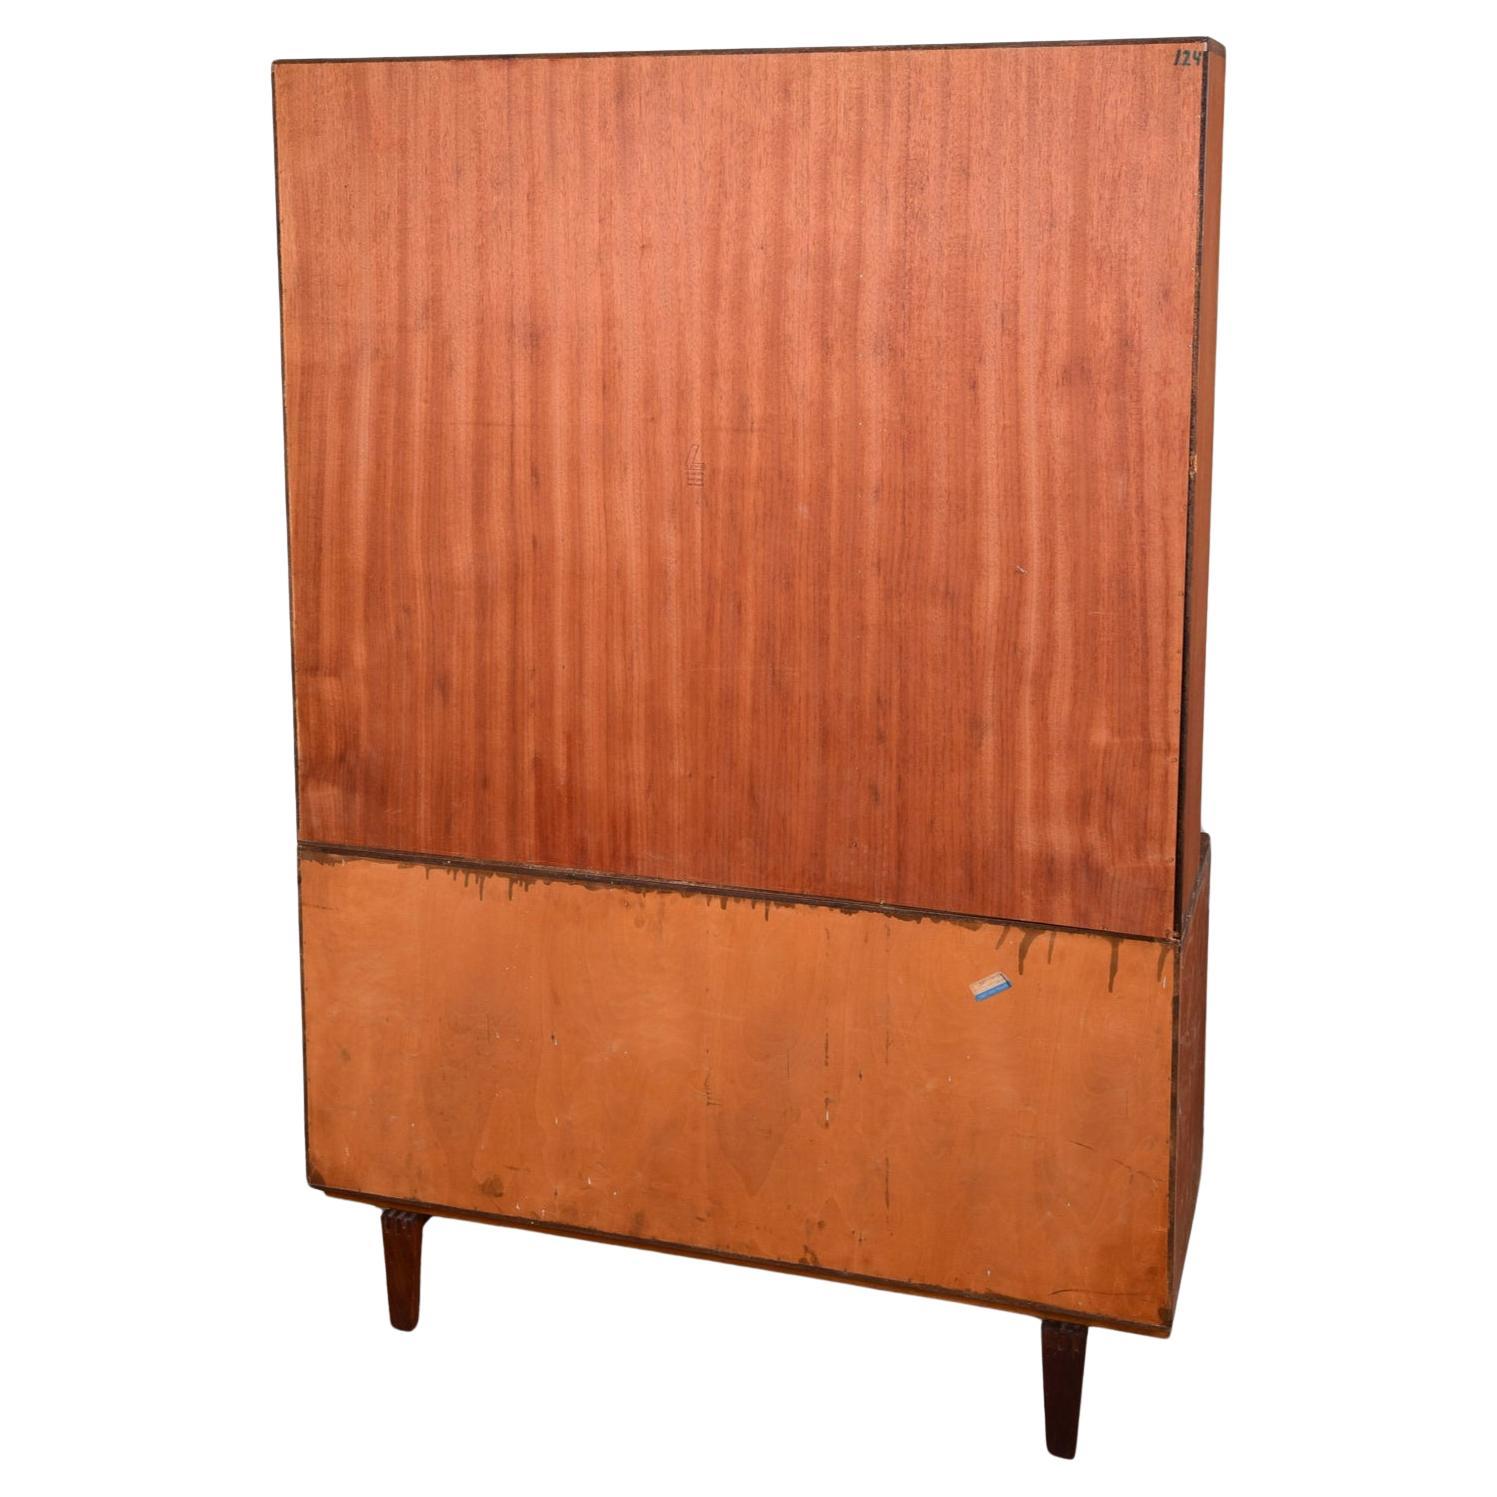 Beautiful mid century Danish modern credenza with shelf unit designed by Peter Løvig Nielsen for Dansk. Teak upper shelf cubby bookcase unit with shelves on top of lower teak credenza has two cabinet doors with adjustable shelves and brass hardware.